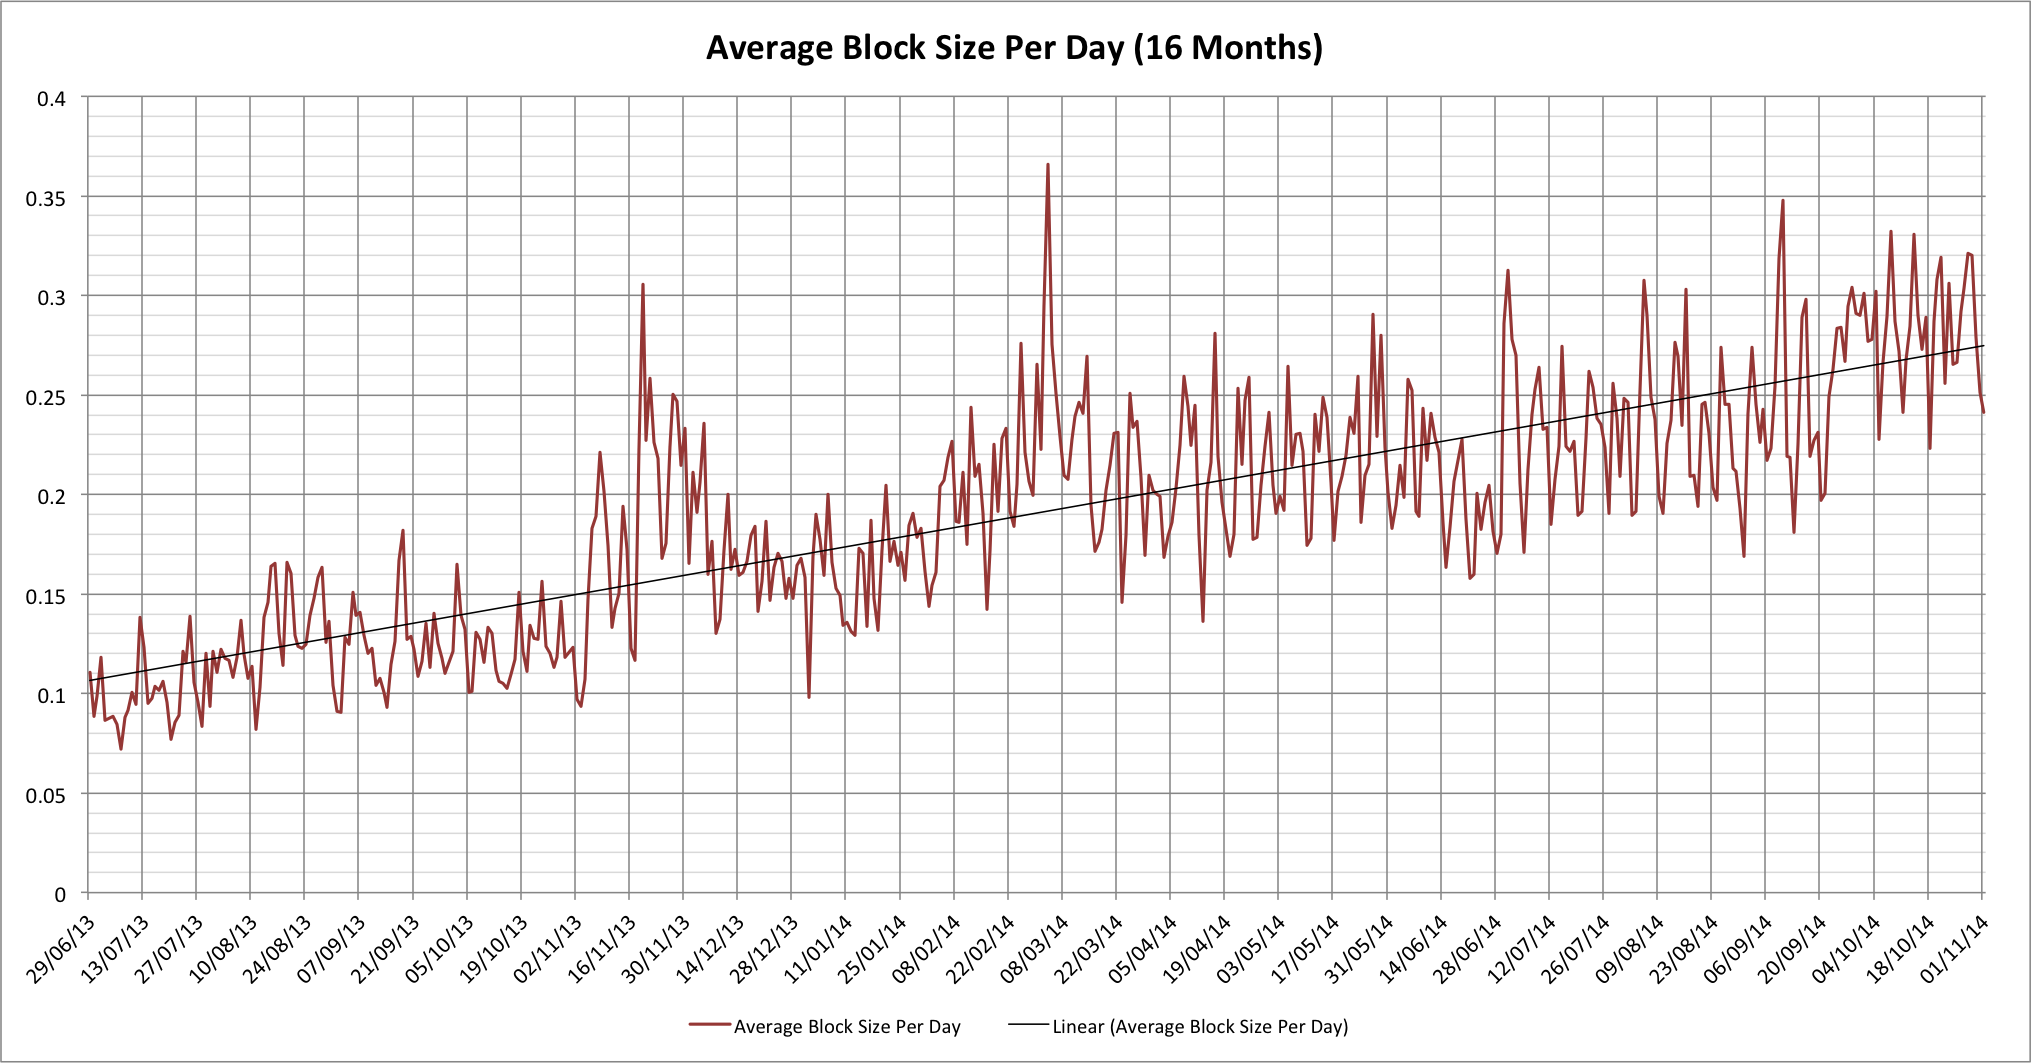 Average Bitcoin block size over the last 16 months (linear chart)